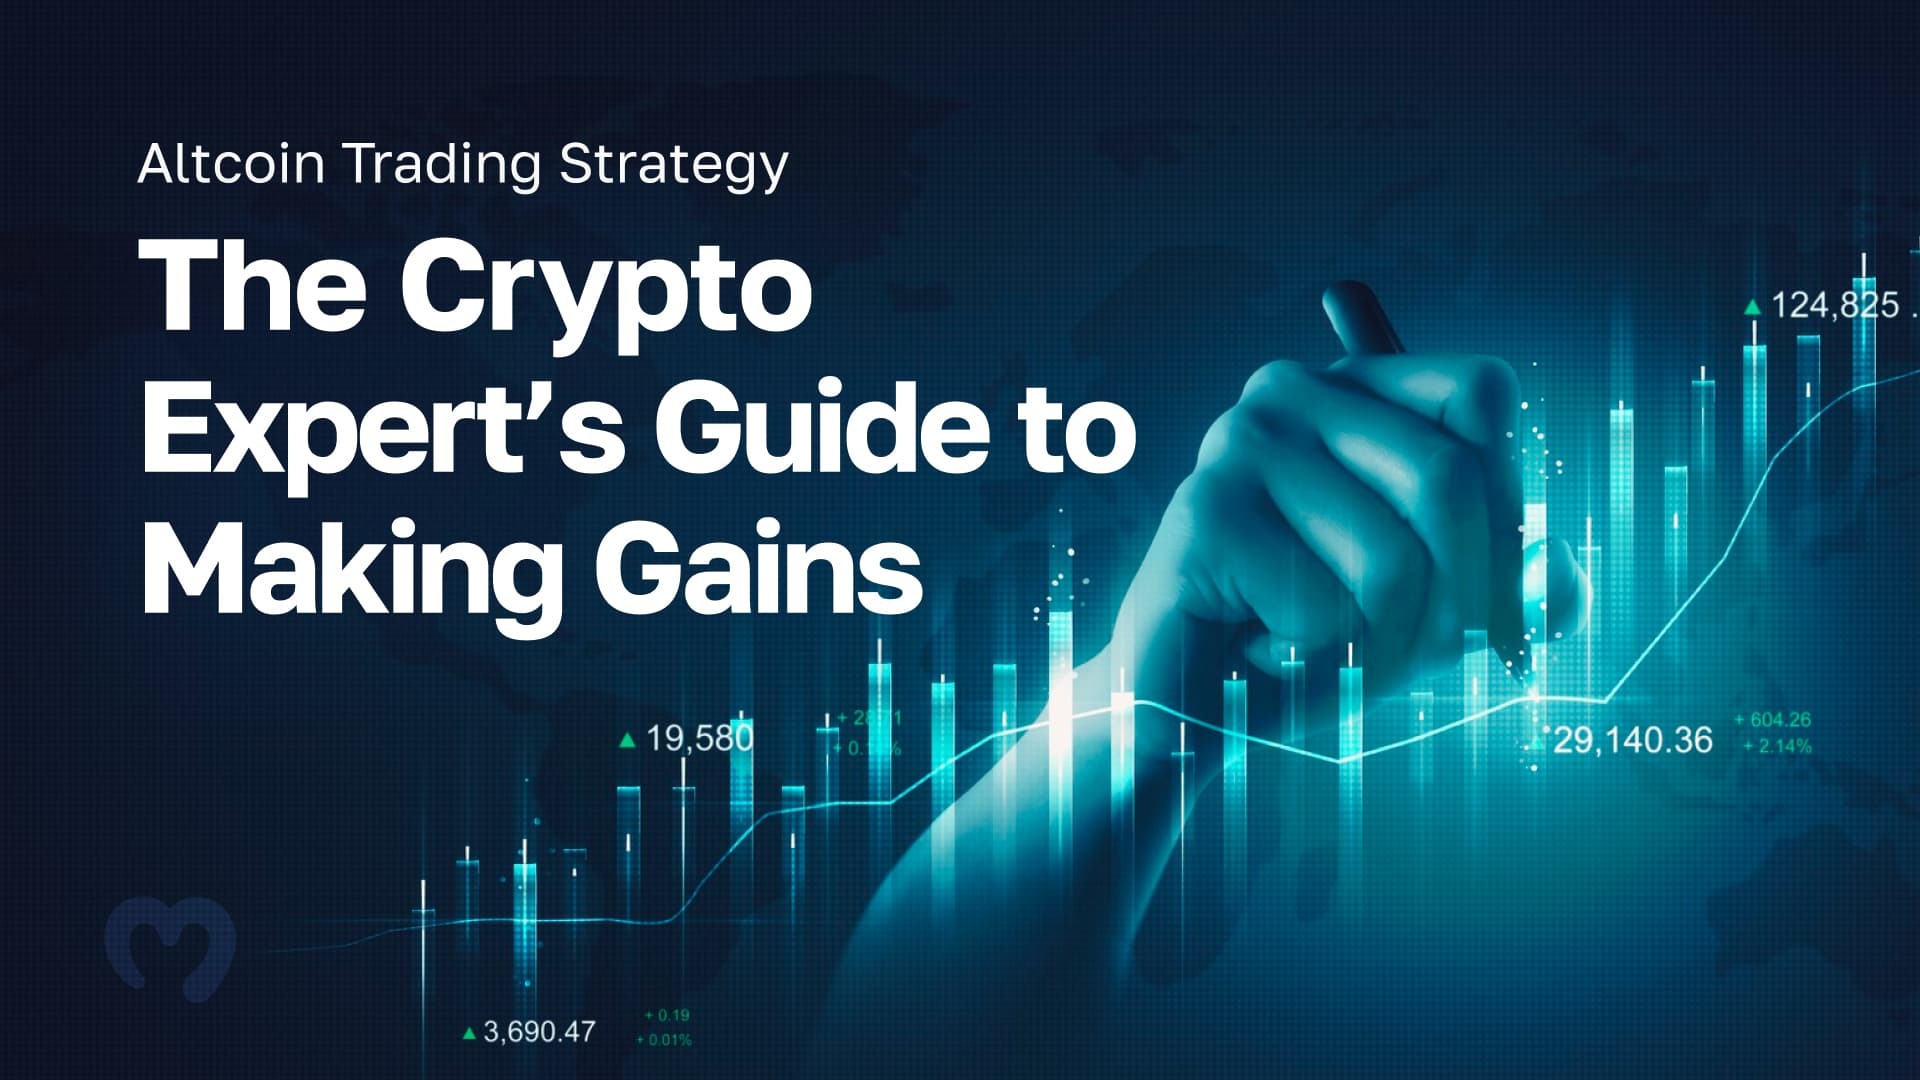 Altcoin Trading Strategy - The Crypto Expert's Guide to Making Gains